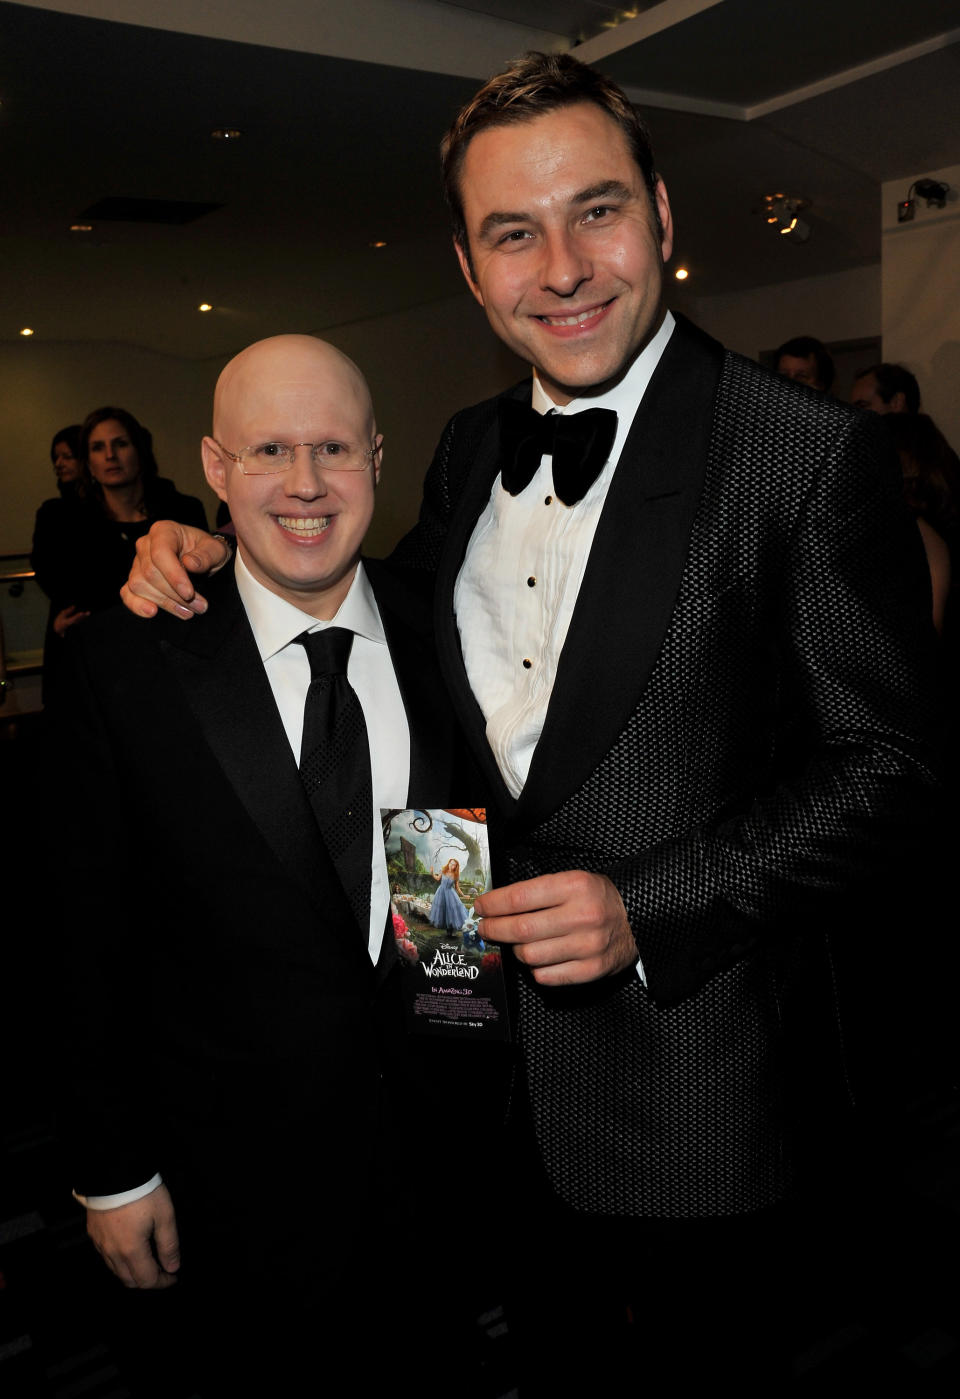 LONDON, ENGLAND - FEBRUARY 25:  ActorsMatt Lucas and David Walliams attend the Royal World Premiere of Tim Burton's 'Alice In Wonderland' at the Odeon Leicester Square on February 25, 2010 in London, England.  (Photo by Jon Furniss/WireImage) 